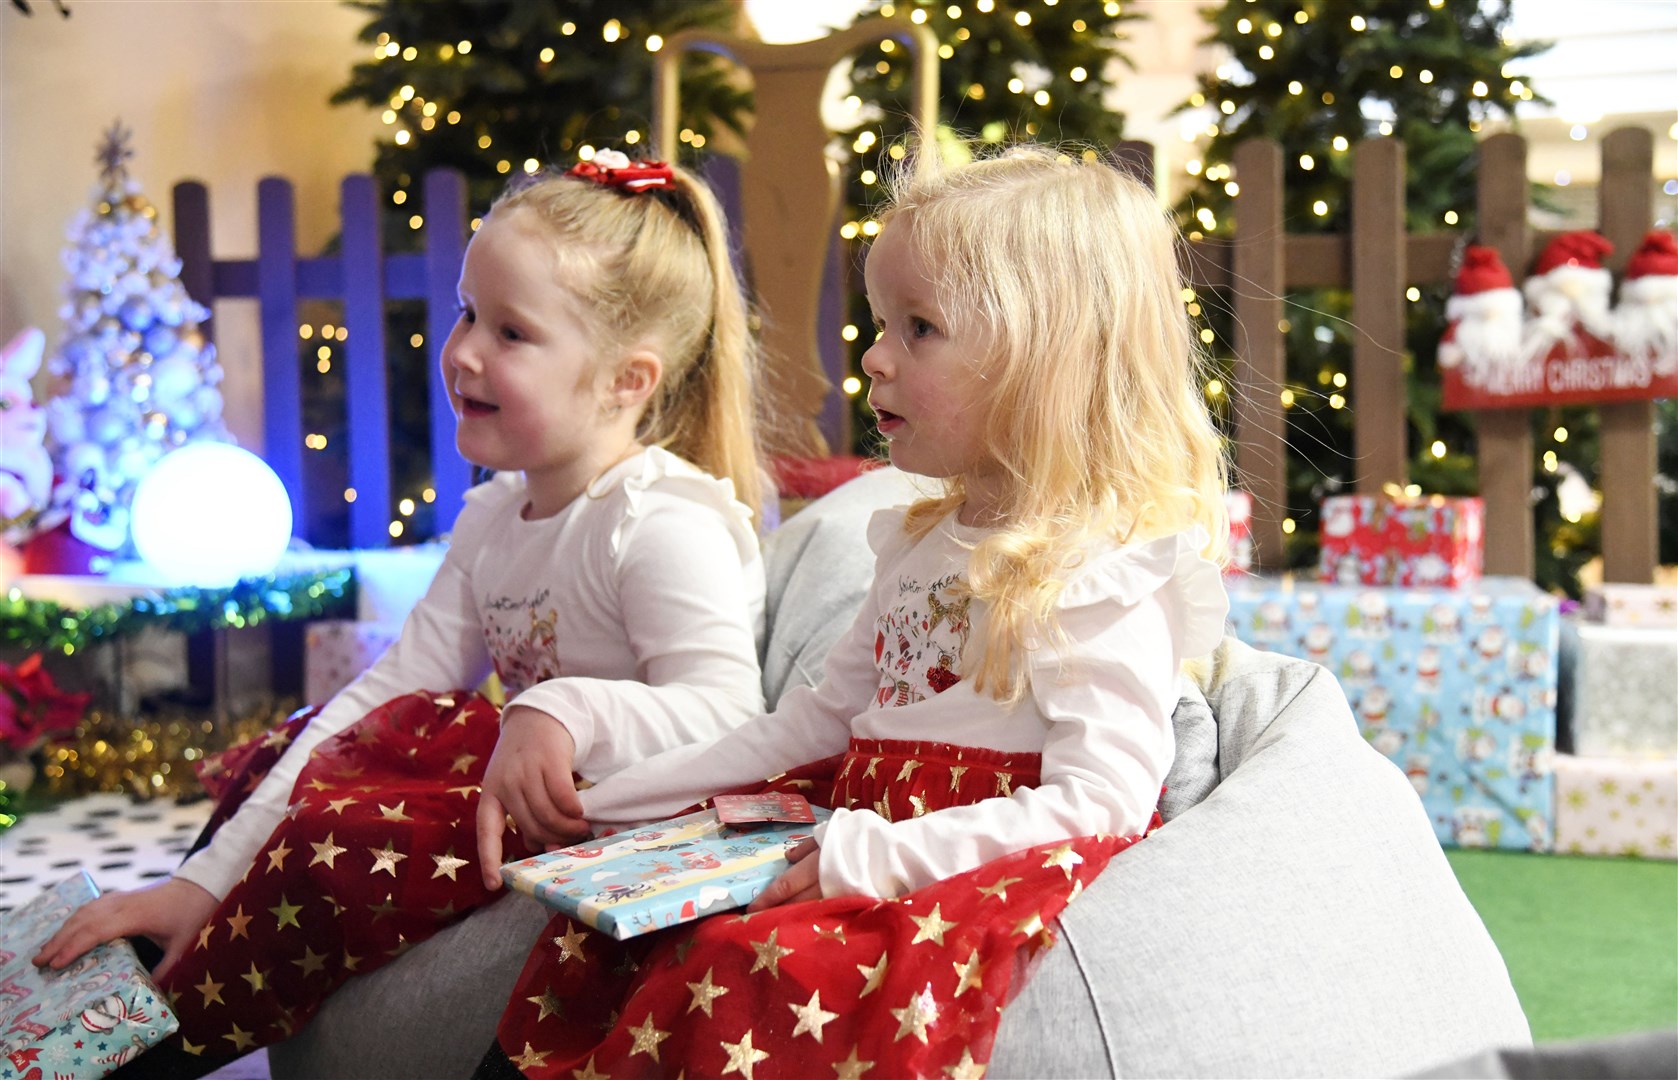 Amelia-May (left) and Merida Forrest (right) enjoying their visit to see Santa at his Grotto in the St Giles Centre in Elgin...Pictre: Beth Taylor.